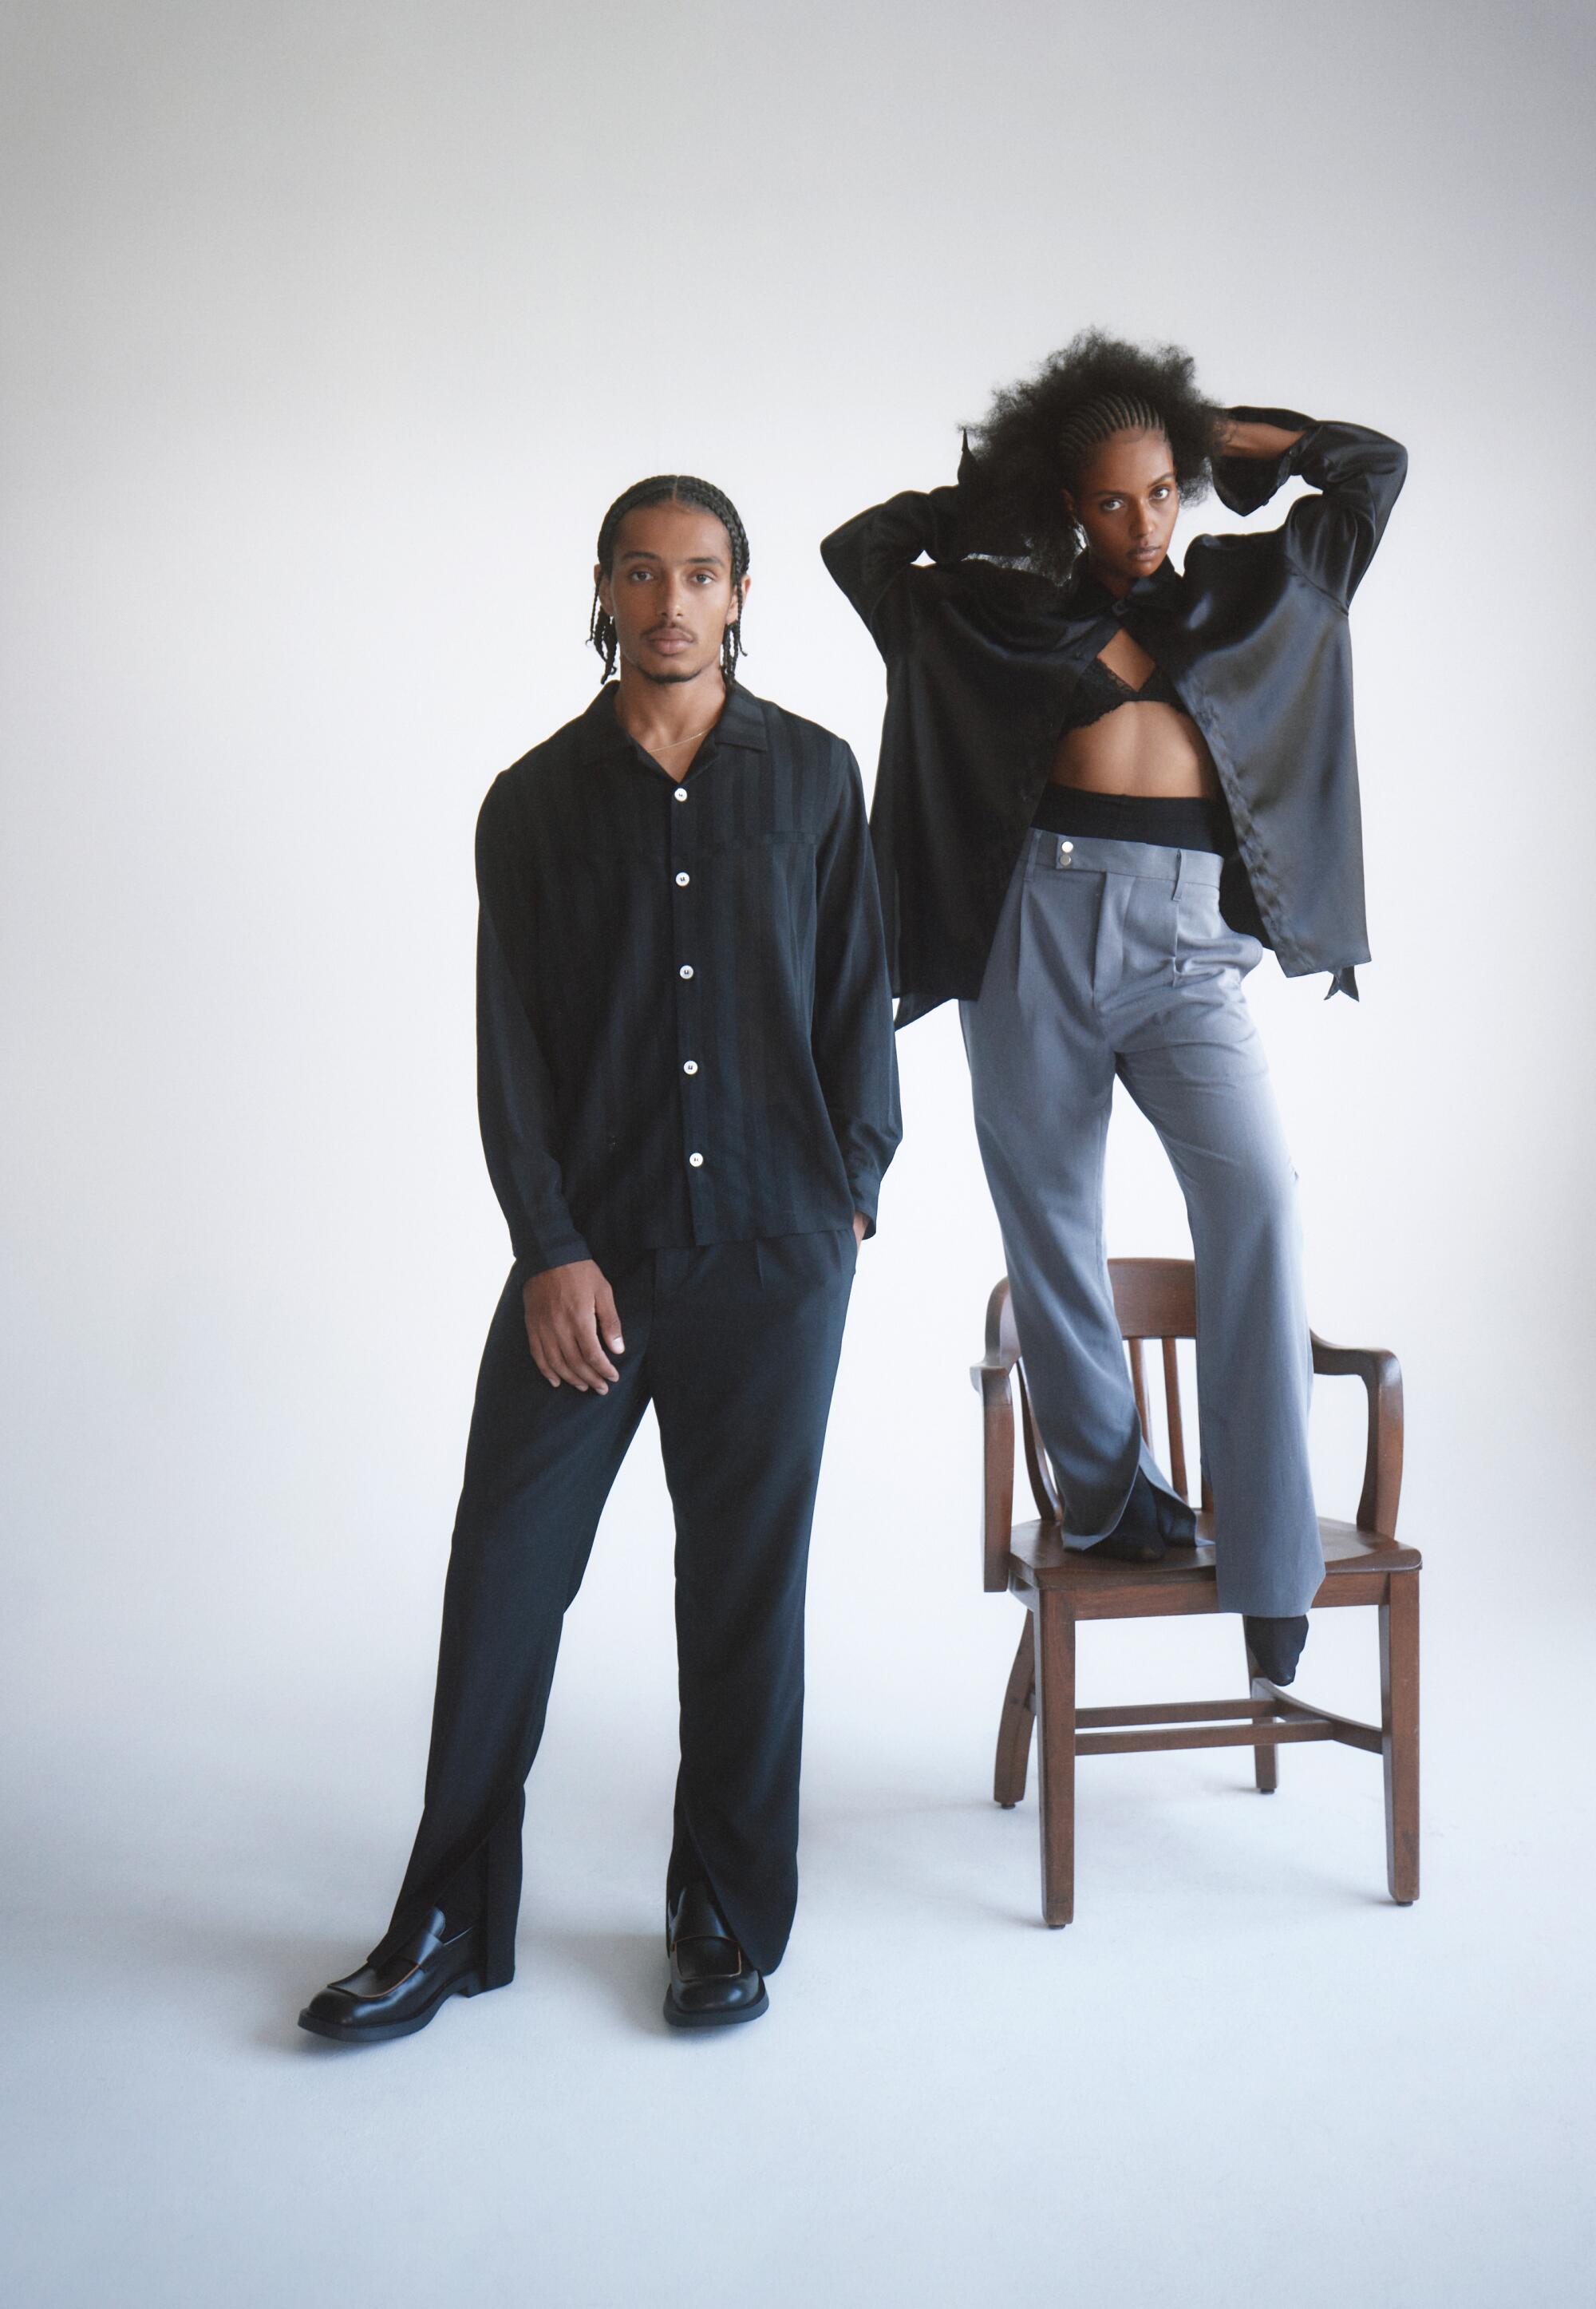 Standing to the left, a male model wears an all-black outfit. To the right, a female model poses, standing on a chair.